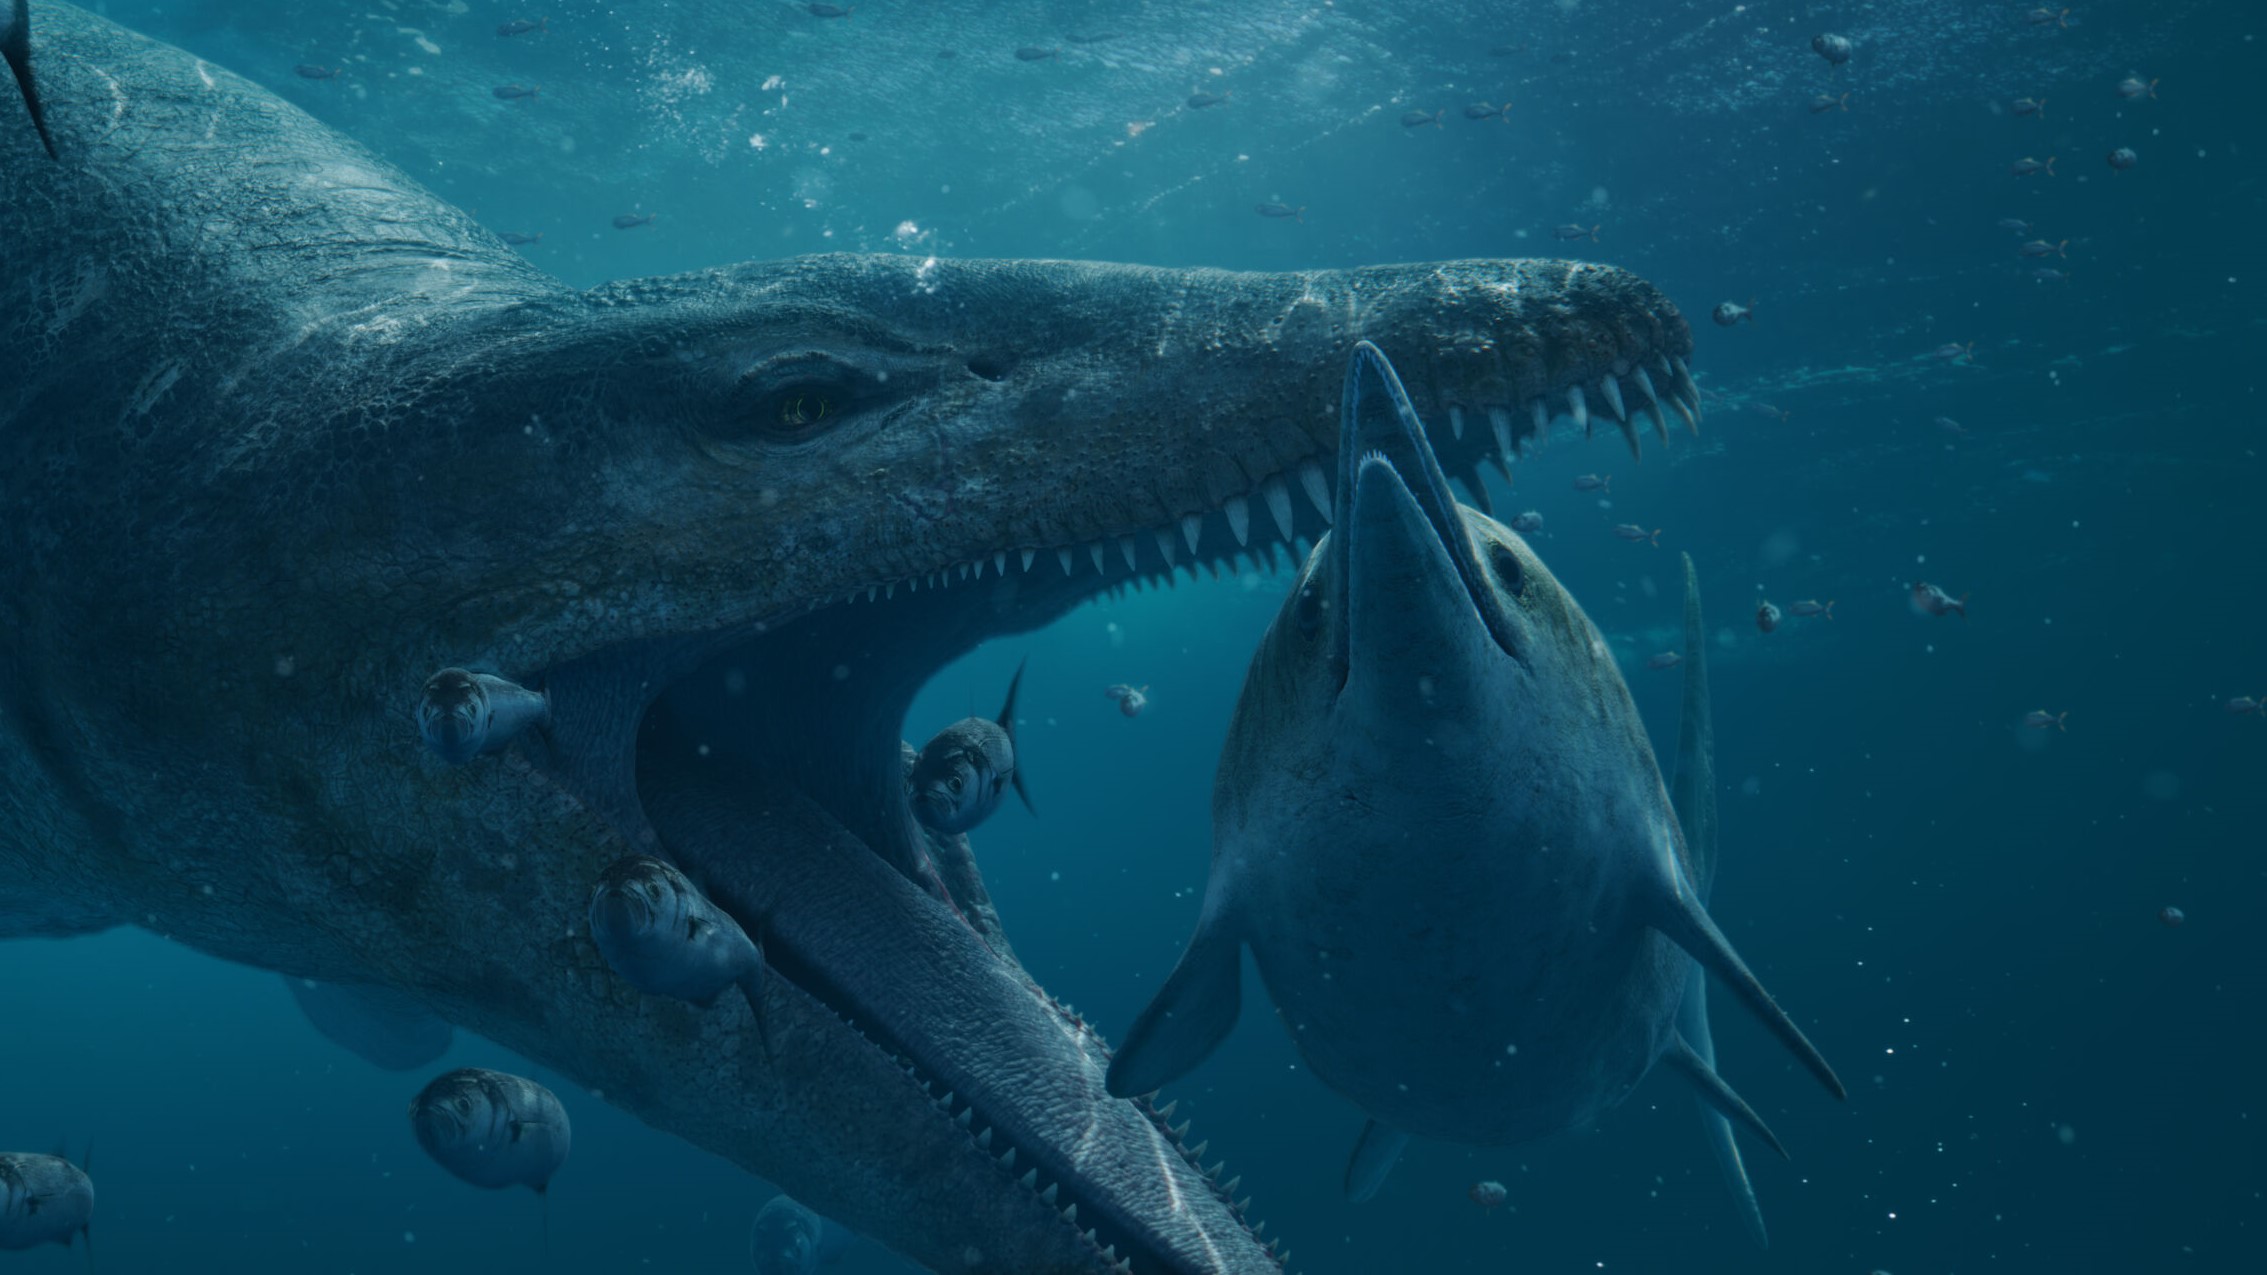 reconstruction of a pliosaur about to attack an ichthyosaur in the Jurassic ocean